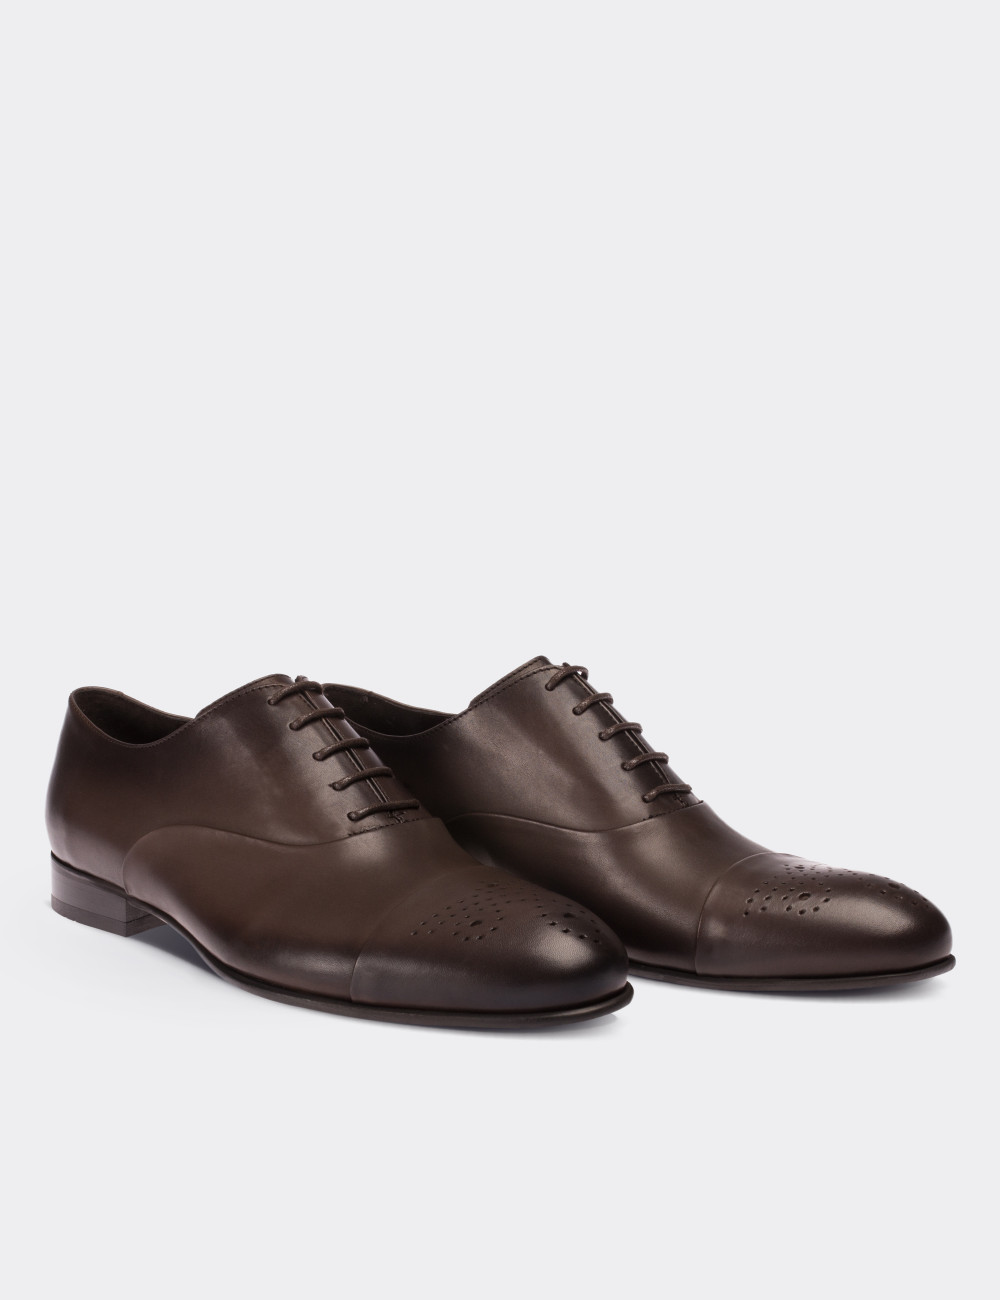 Sandstone  Leather Classic Shoes - 01653MVZNM01